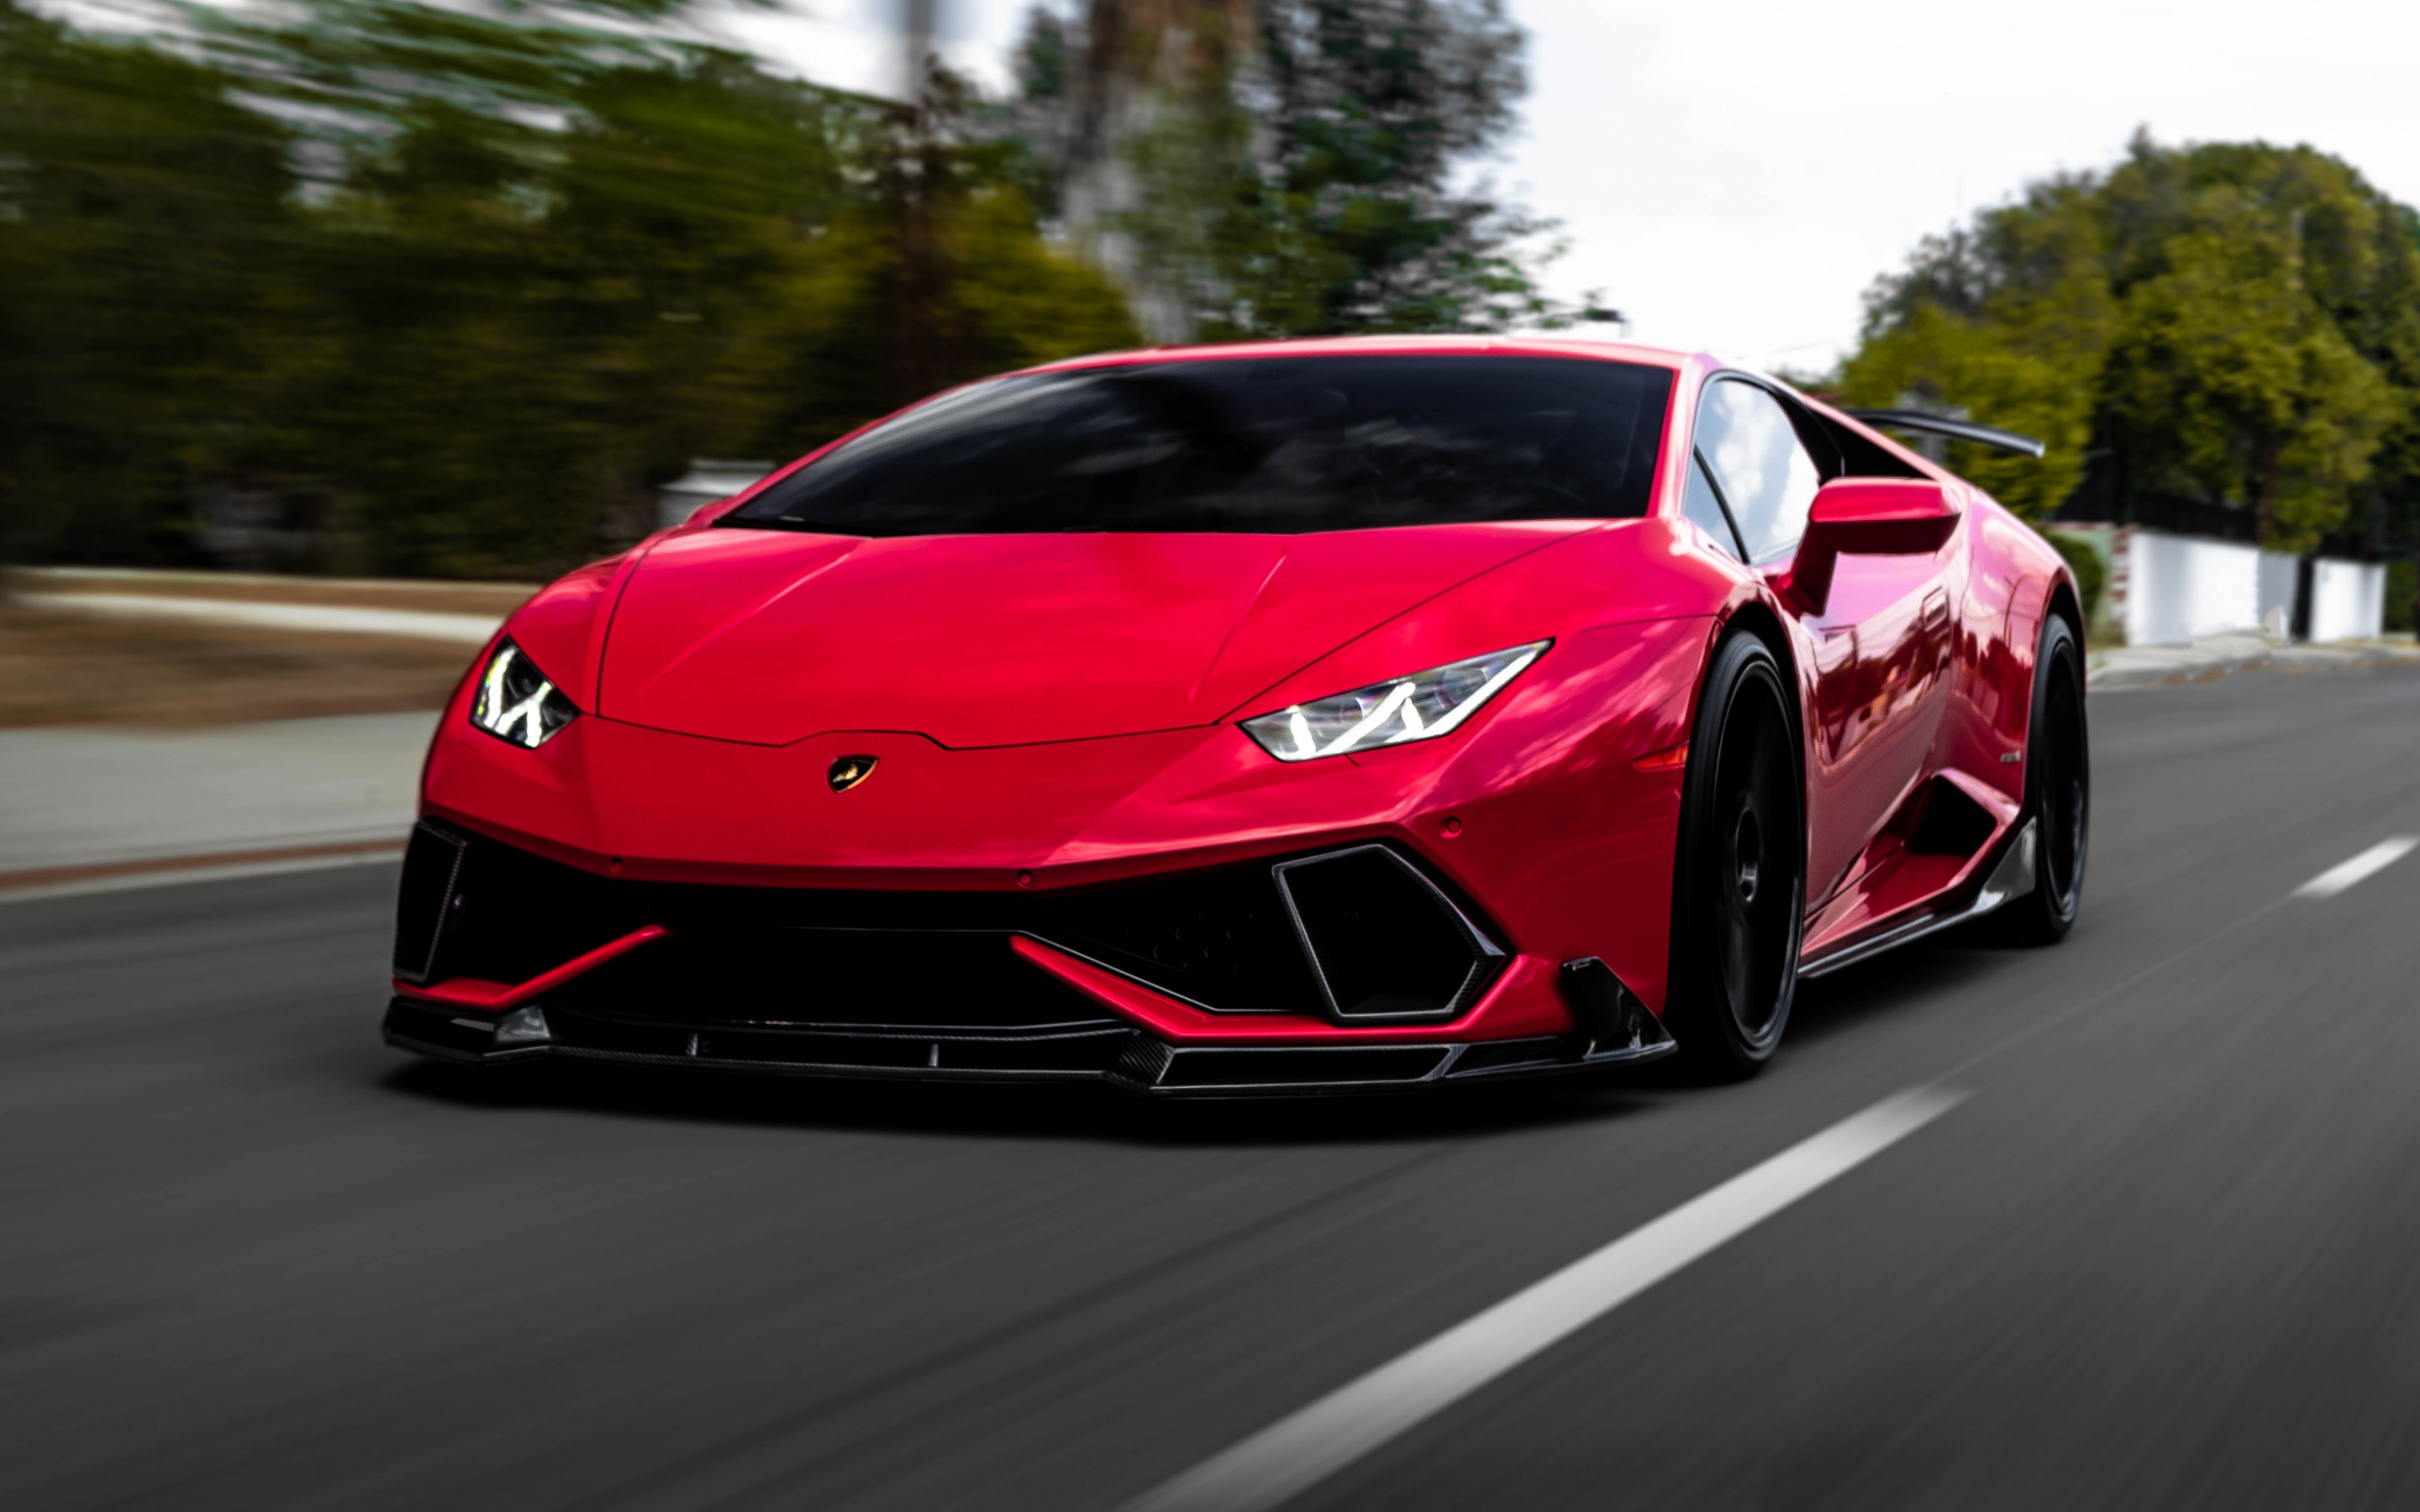 Lamborghini Huracan Wallpapers for Android, iPhone and iPad